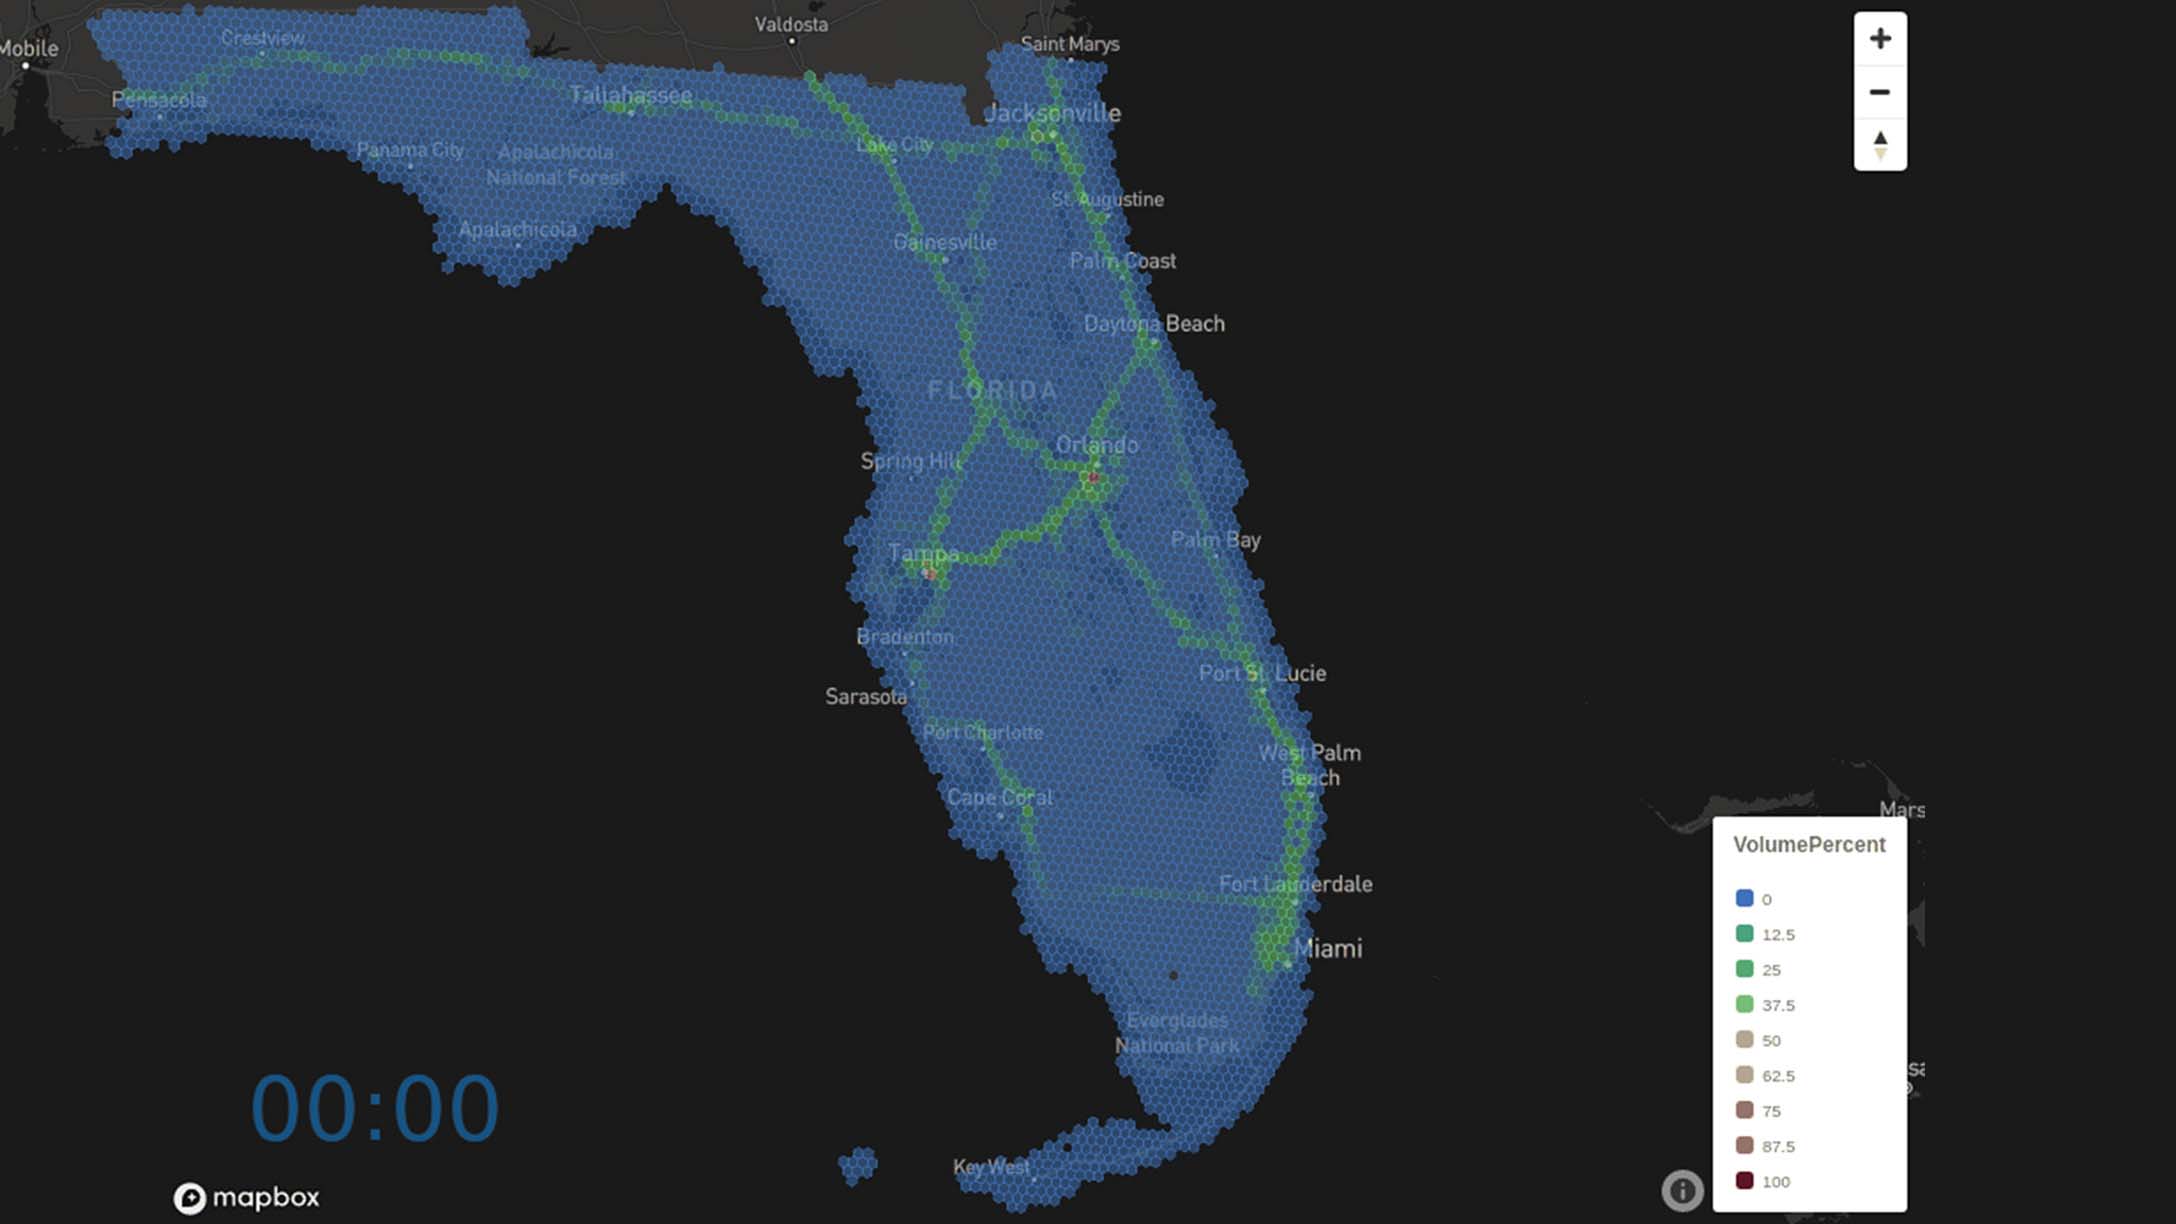 Florida prepares for Hurricane Dorian: View real-time data insights